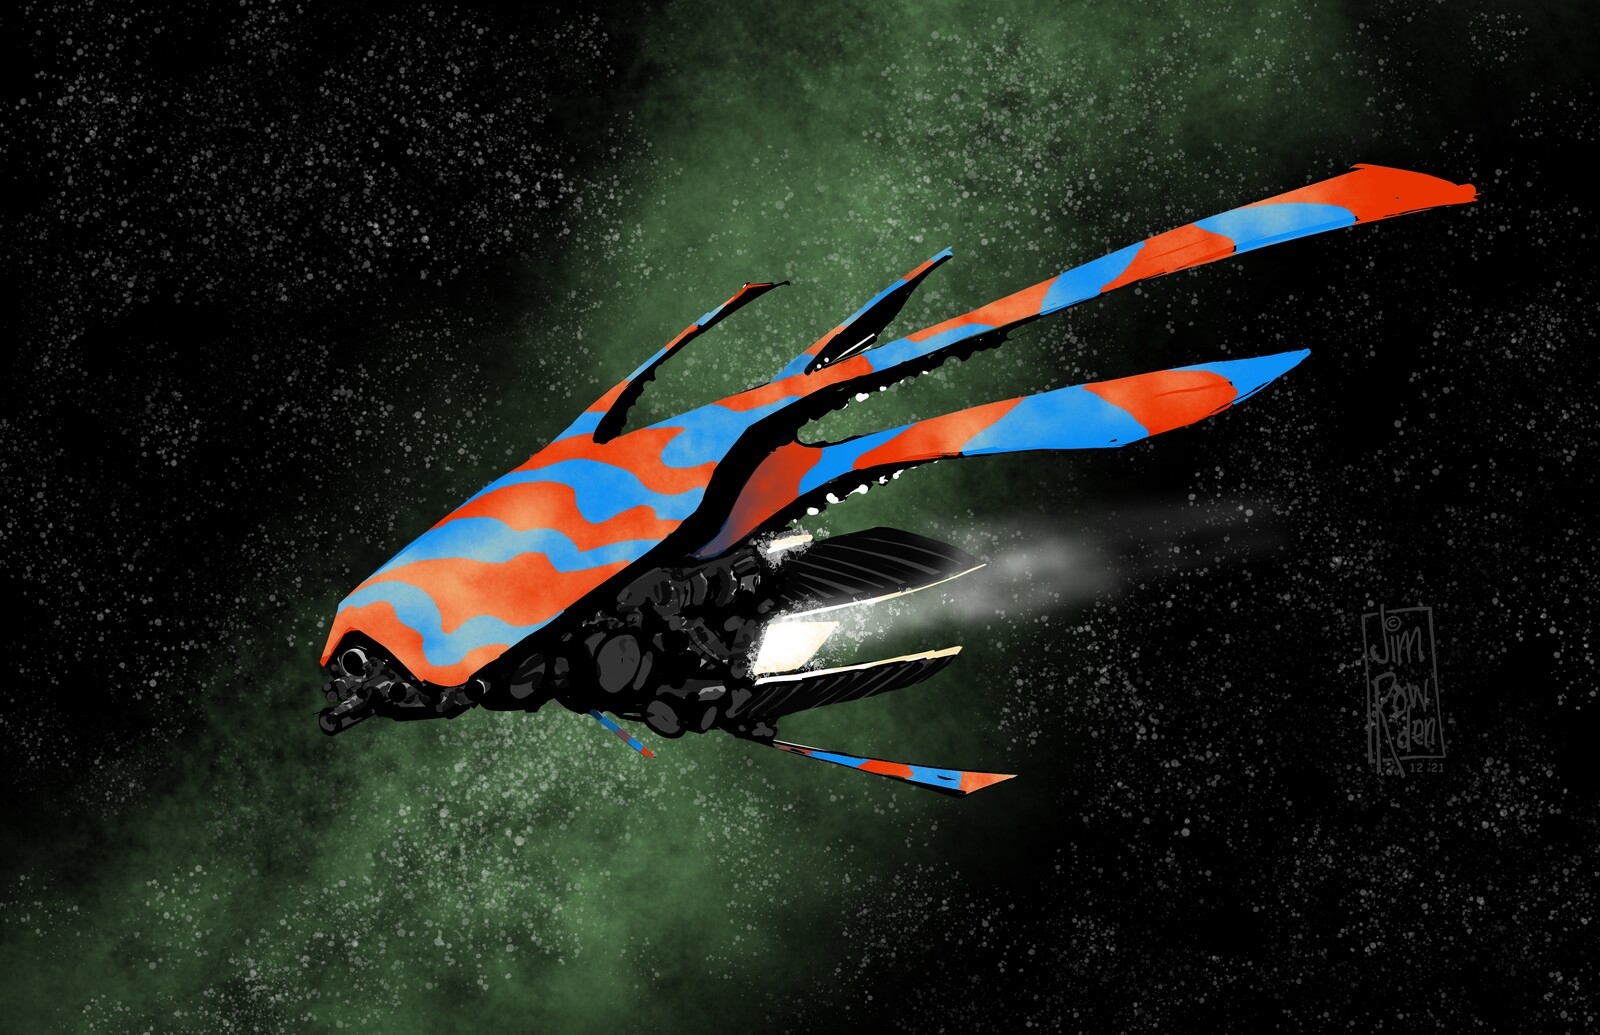 Totally ripping off Chris Foss with this spaceship sketch.